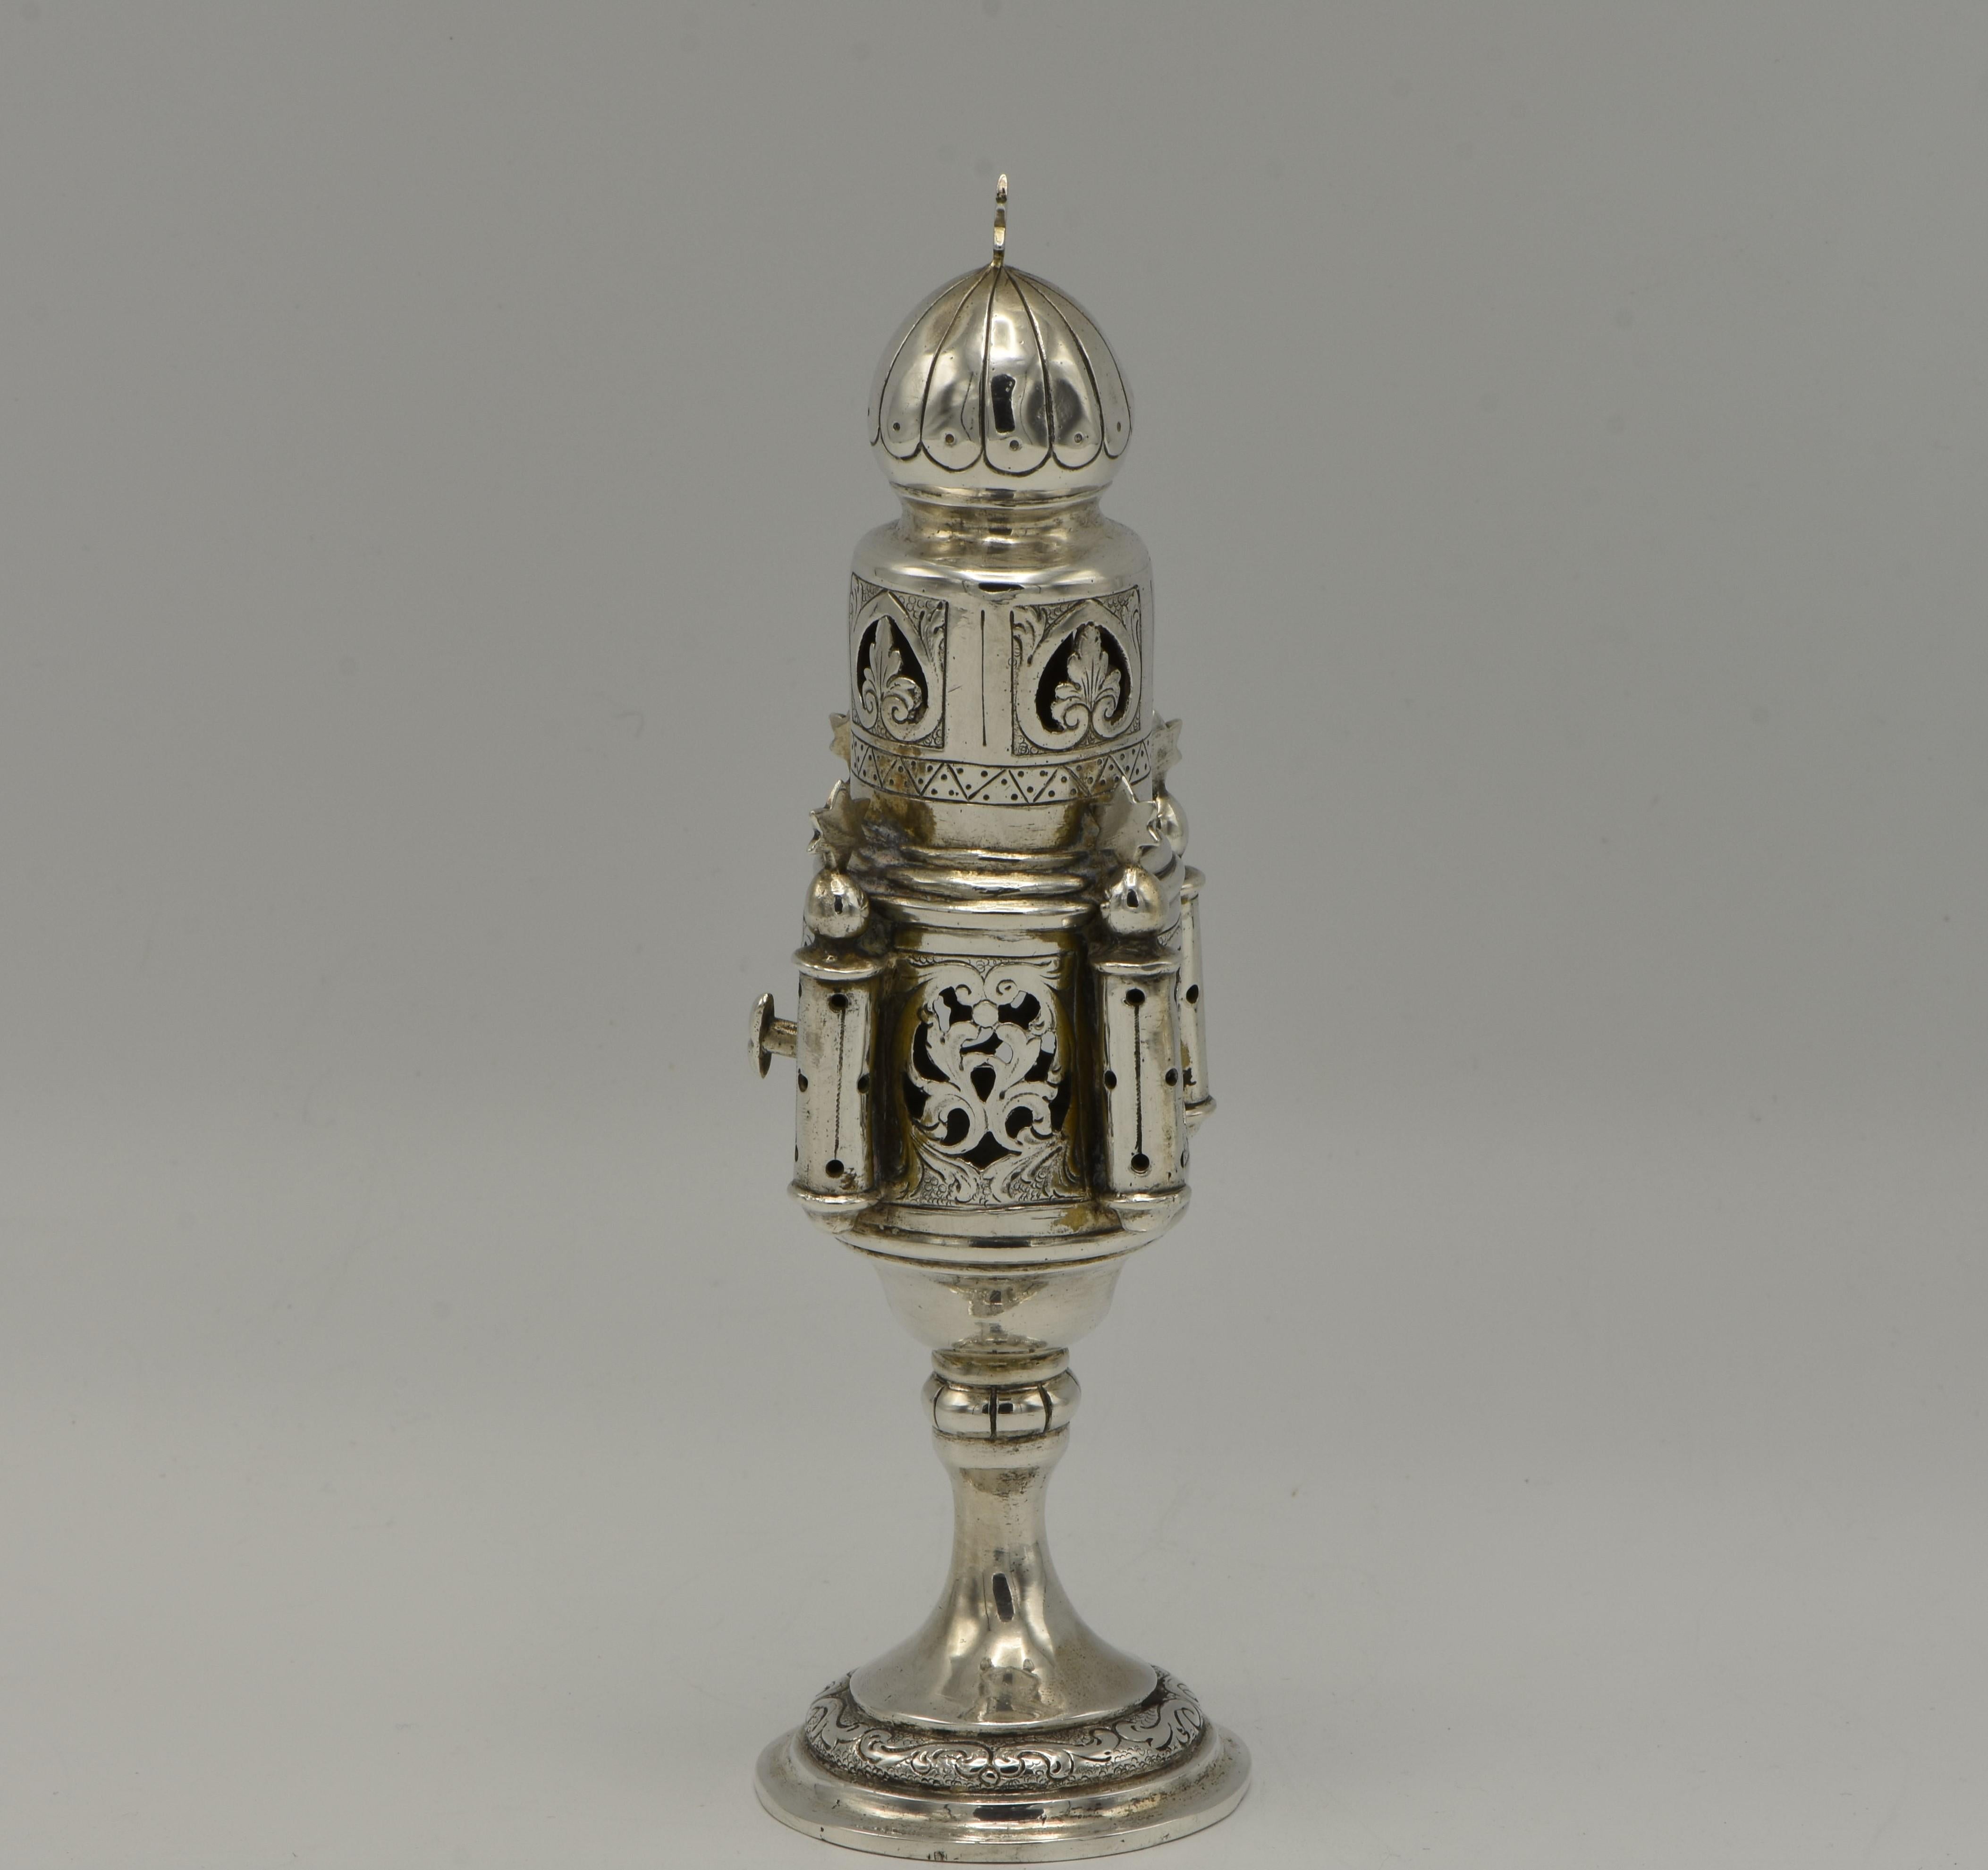 Silver spice tower, cast, pierced, and engraved, Germany, circa 1890.
Rare model. Its design imitates 19th century European synagogue built in the style of Moorish Revival.

Every item in Menorah Galleries is accompanied by a Lifetime Certificate of